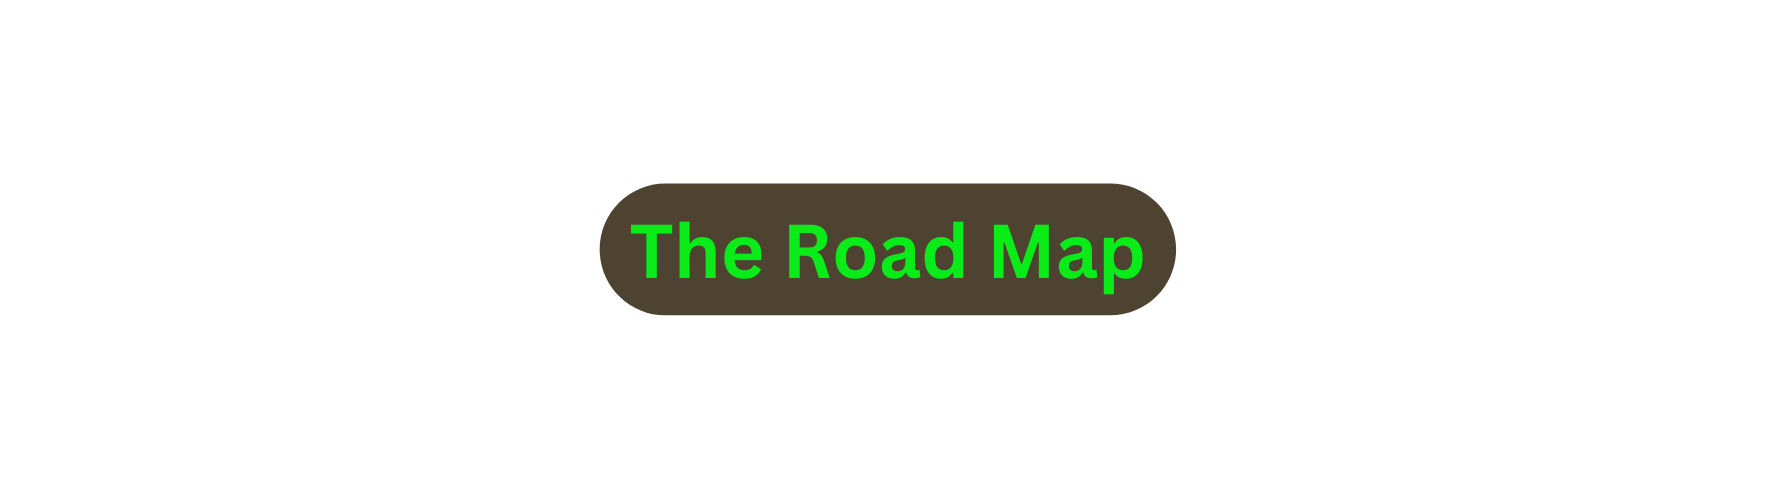 The Road Map